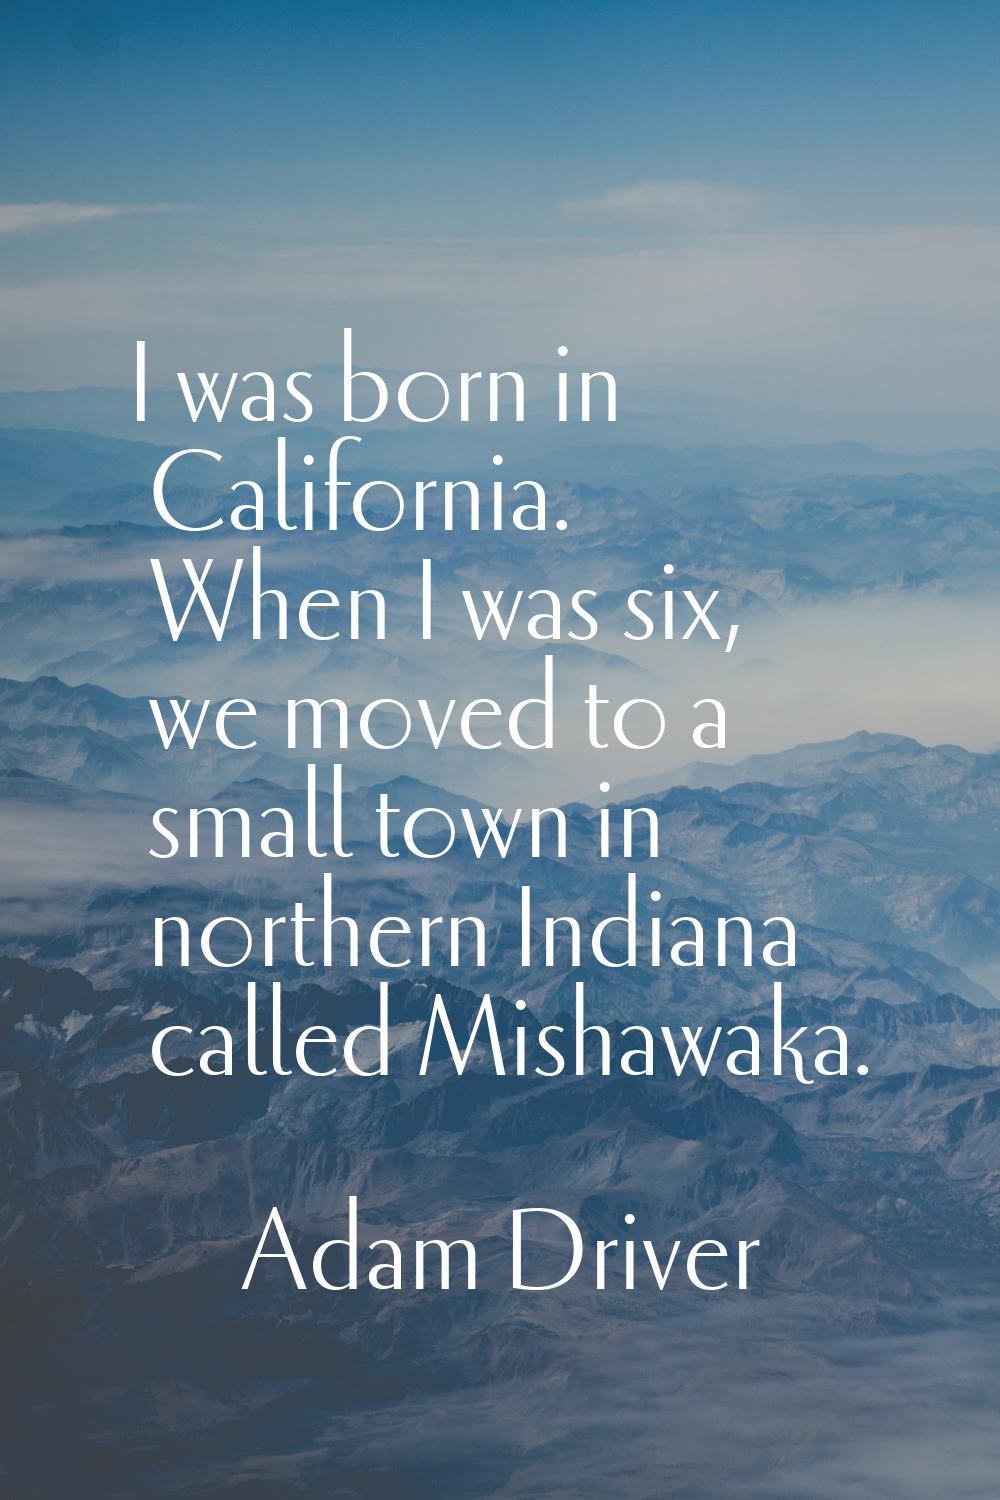 I was born in California. When I was six, we moved to a small town in northern Indiana called Misha